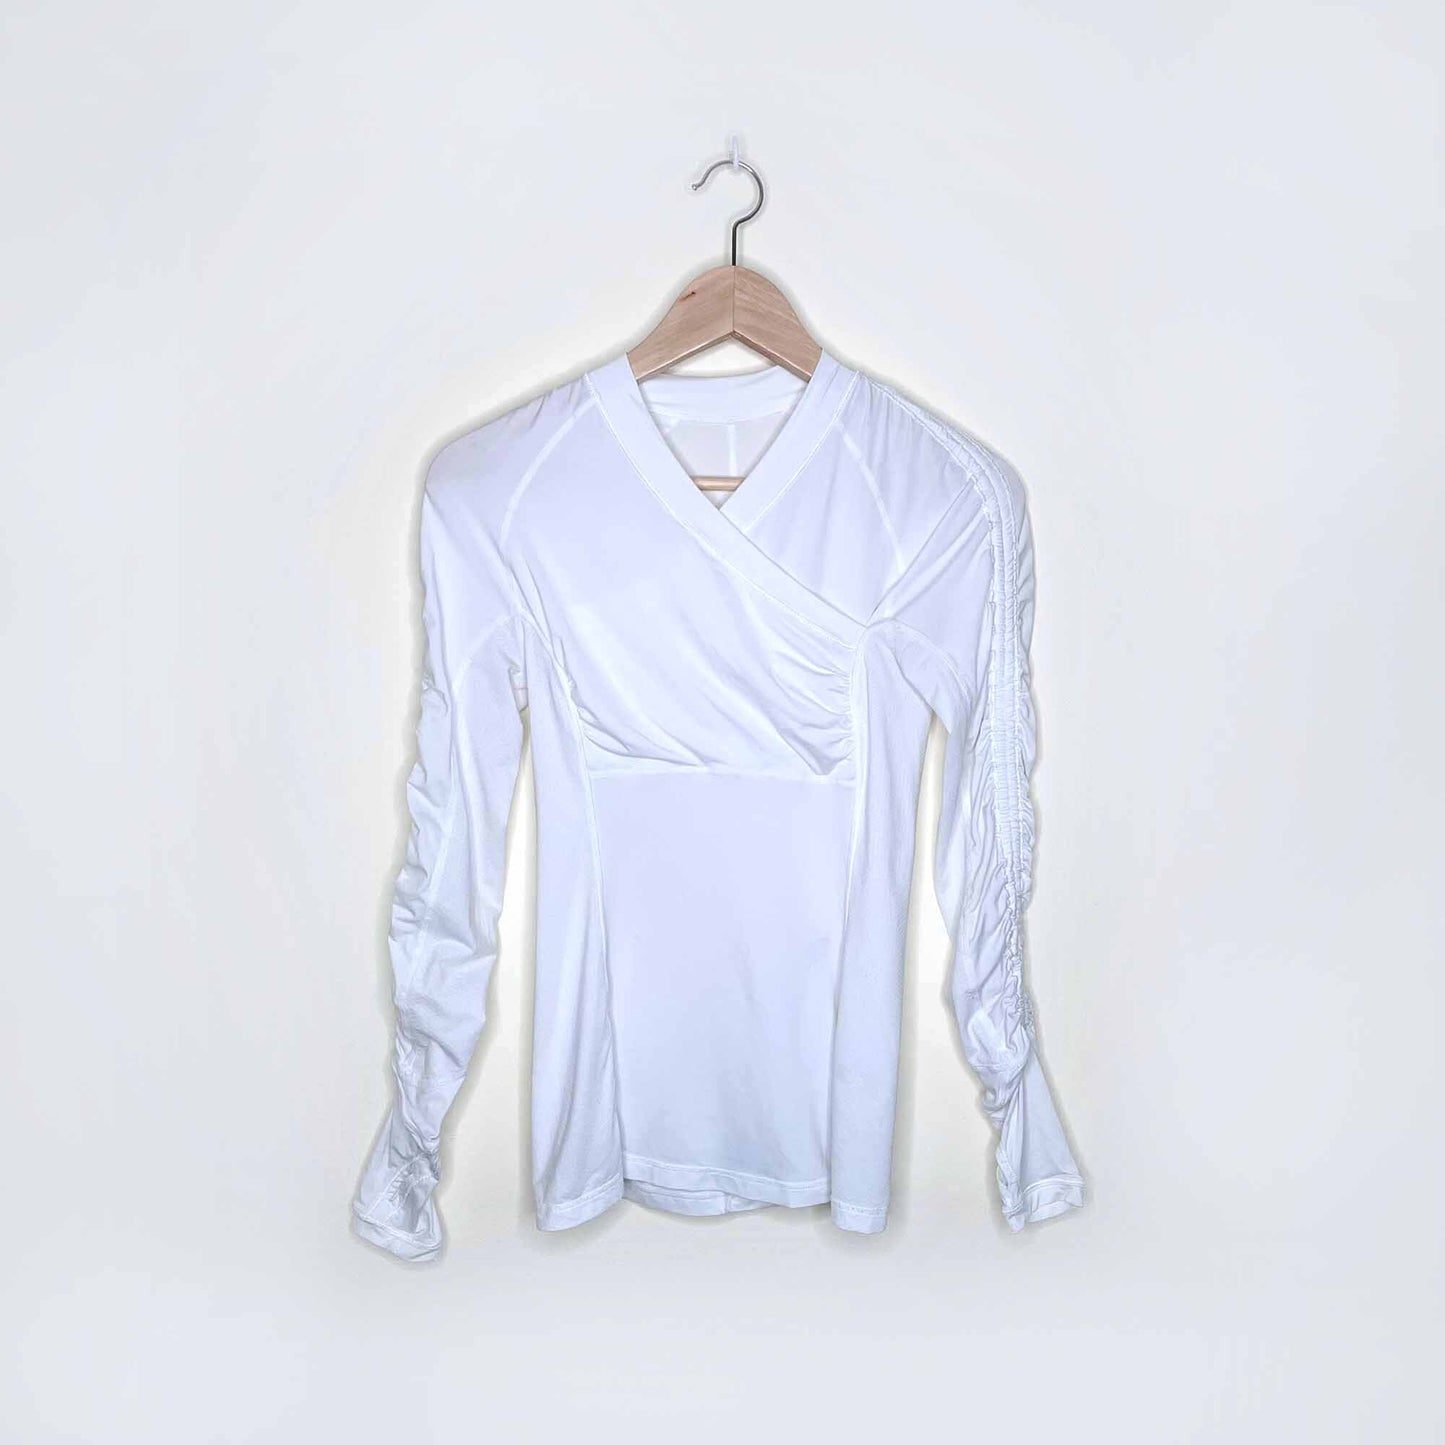 lululemon ruched run sun protection long sleeve top - size 4